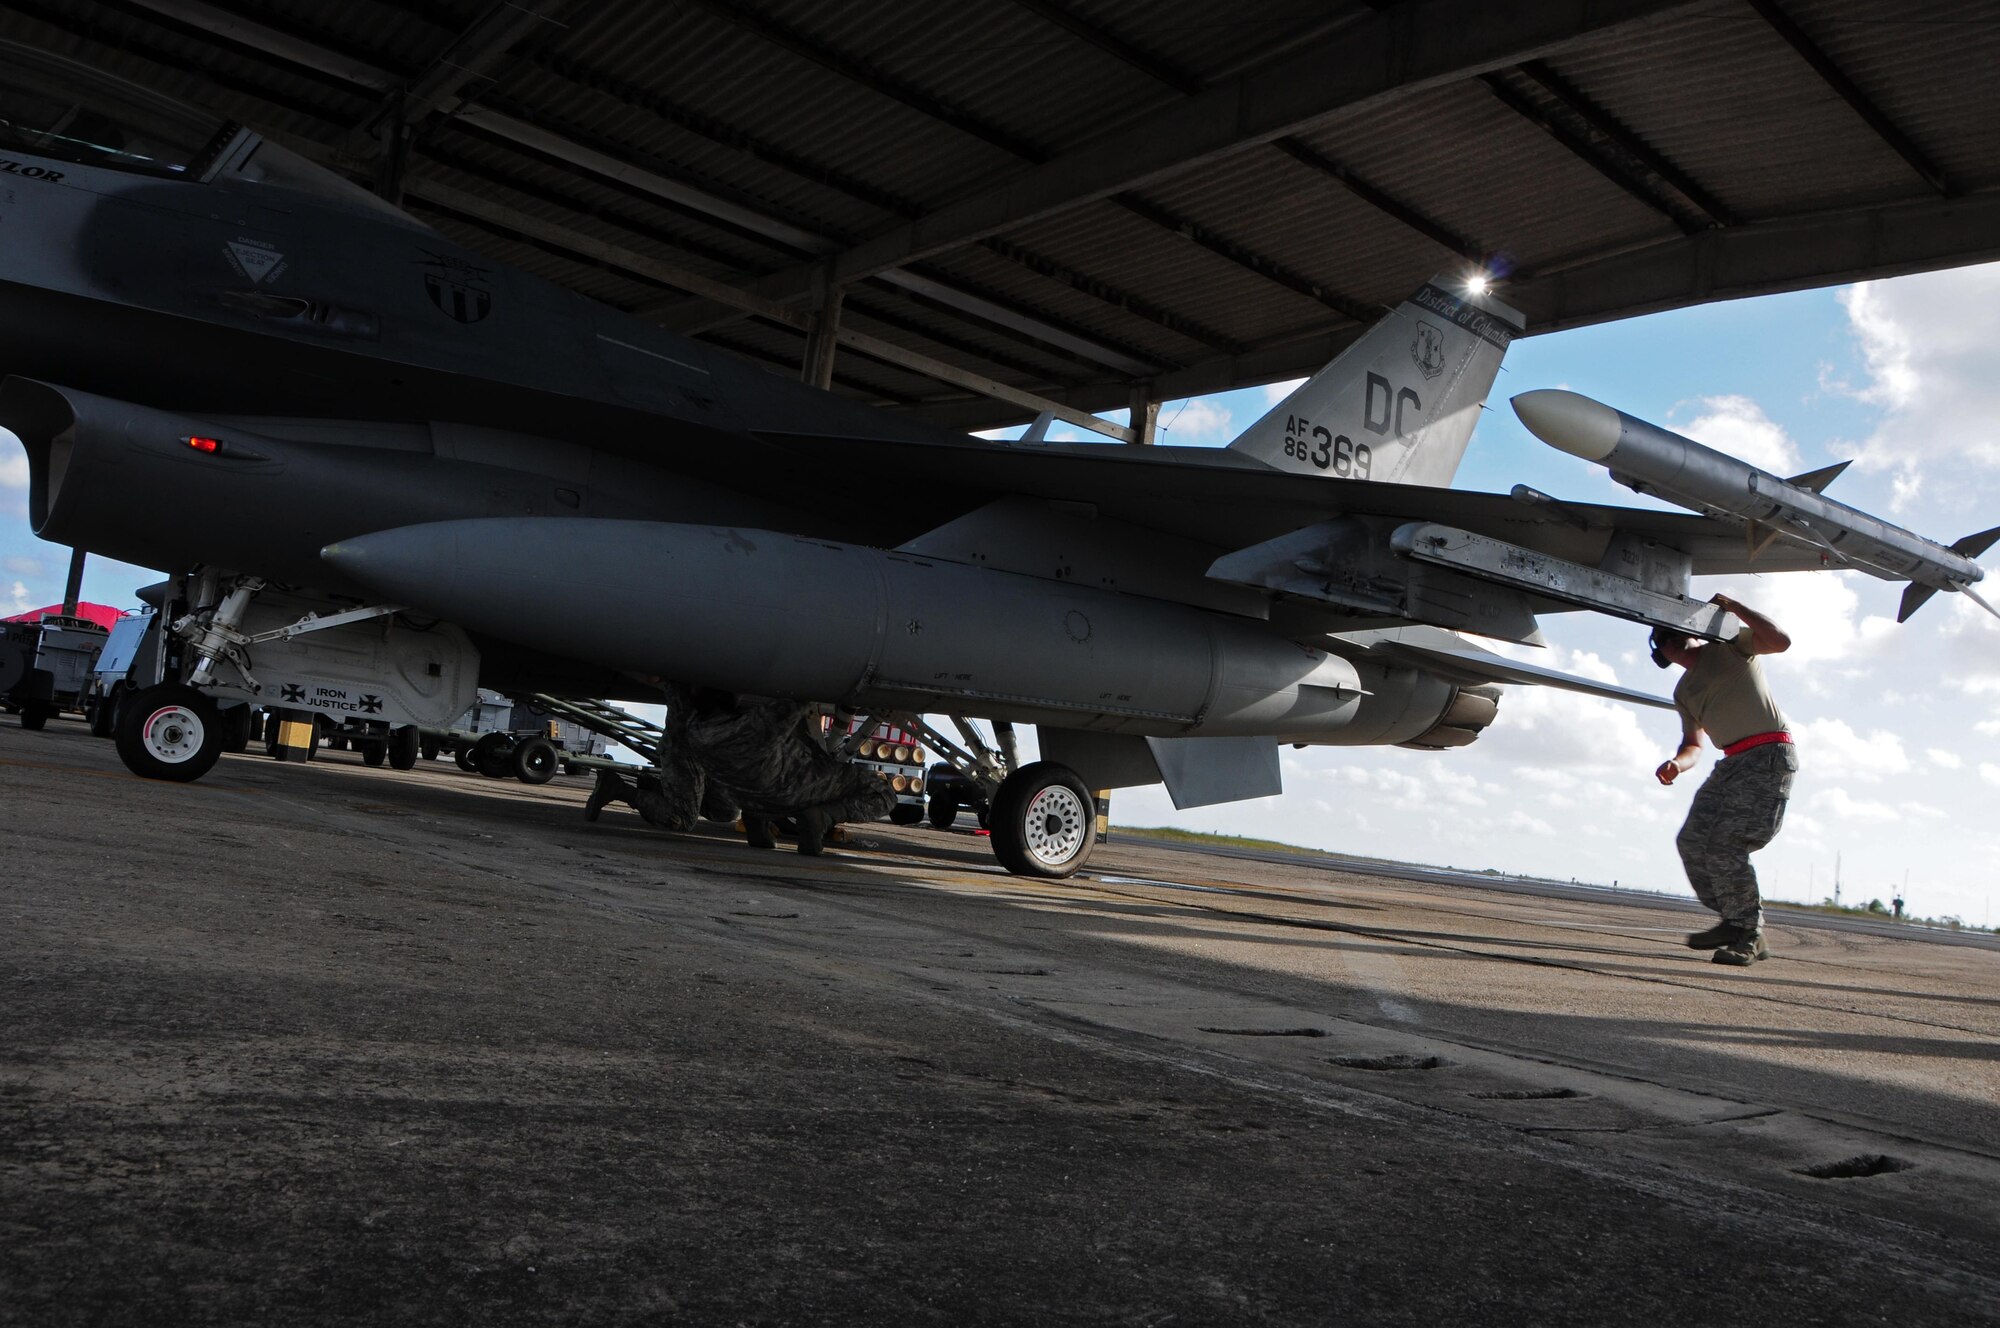 U.S. Air Force airmen from the 113th Maintenance Squadron perform an inspection of an F-16 prior to take off at Natal Air Base, Brazil, Nov. 12, 2013. The purpose of CRUZEX is to prepare participants to work effectively in support of multinational operations. (U.S. Air Force photo by Senior Airman Camilla Elizeu/Released)